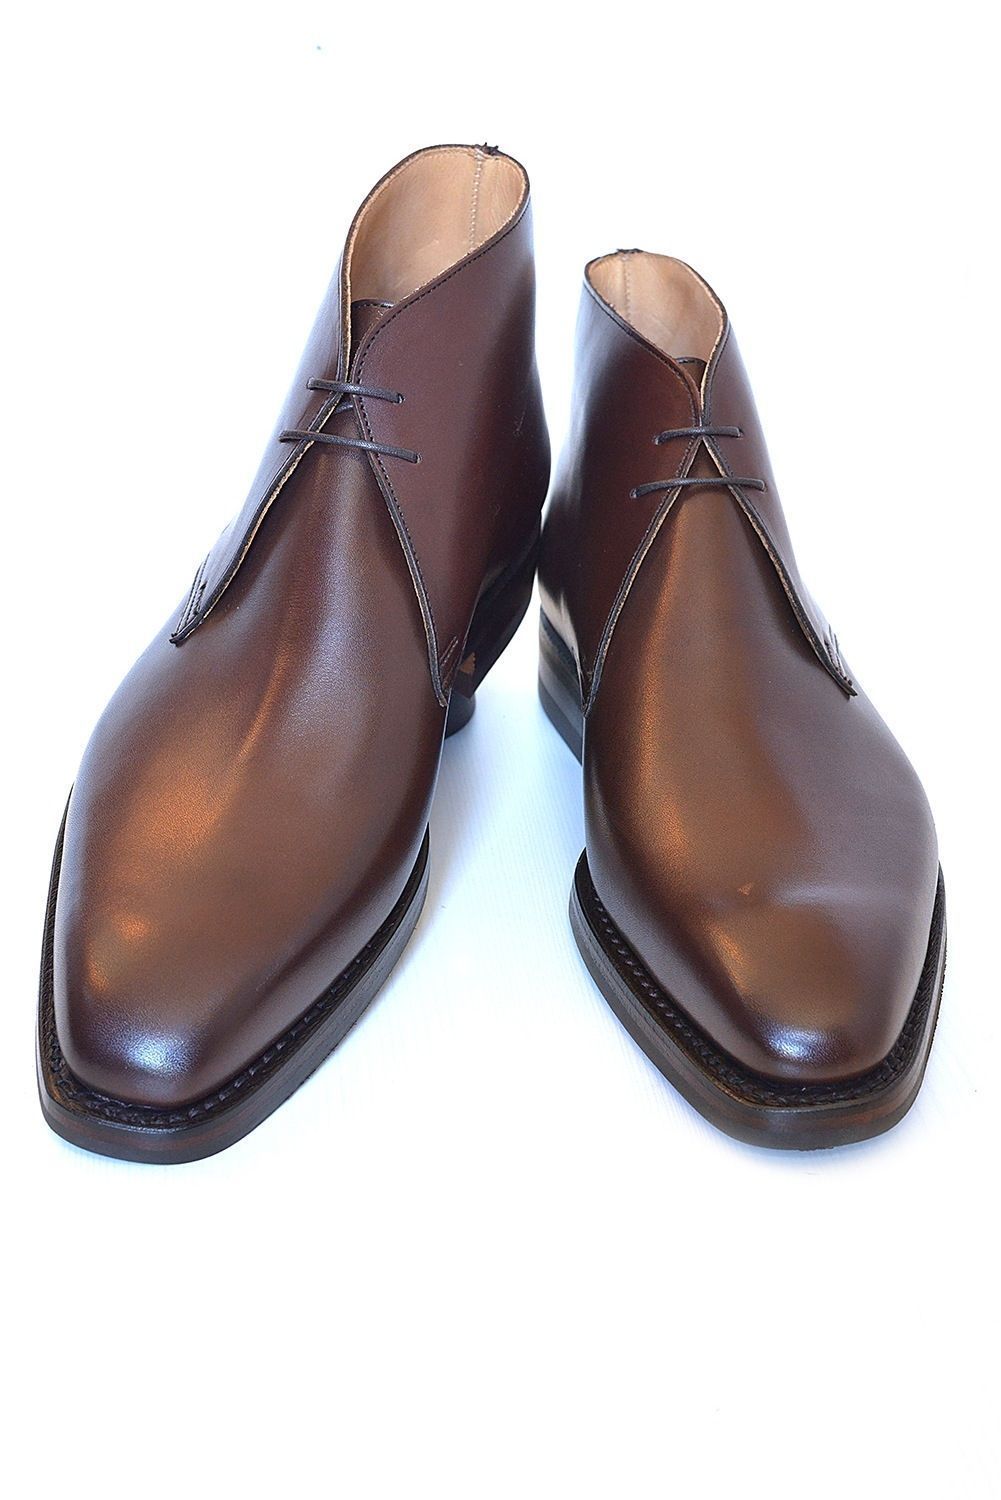 Bespoke Men's Brown Leather Formal Dress Chukka Leather Boots